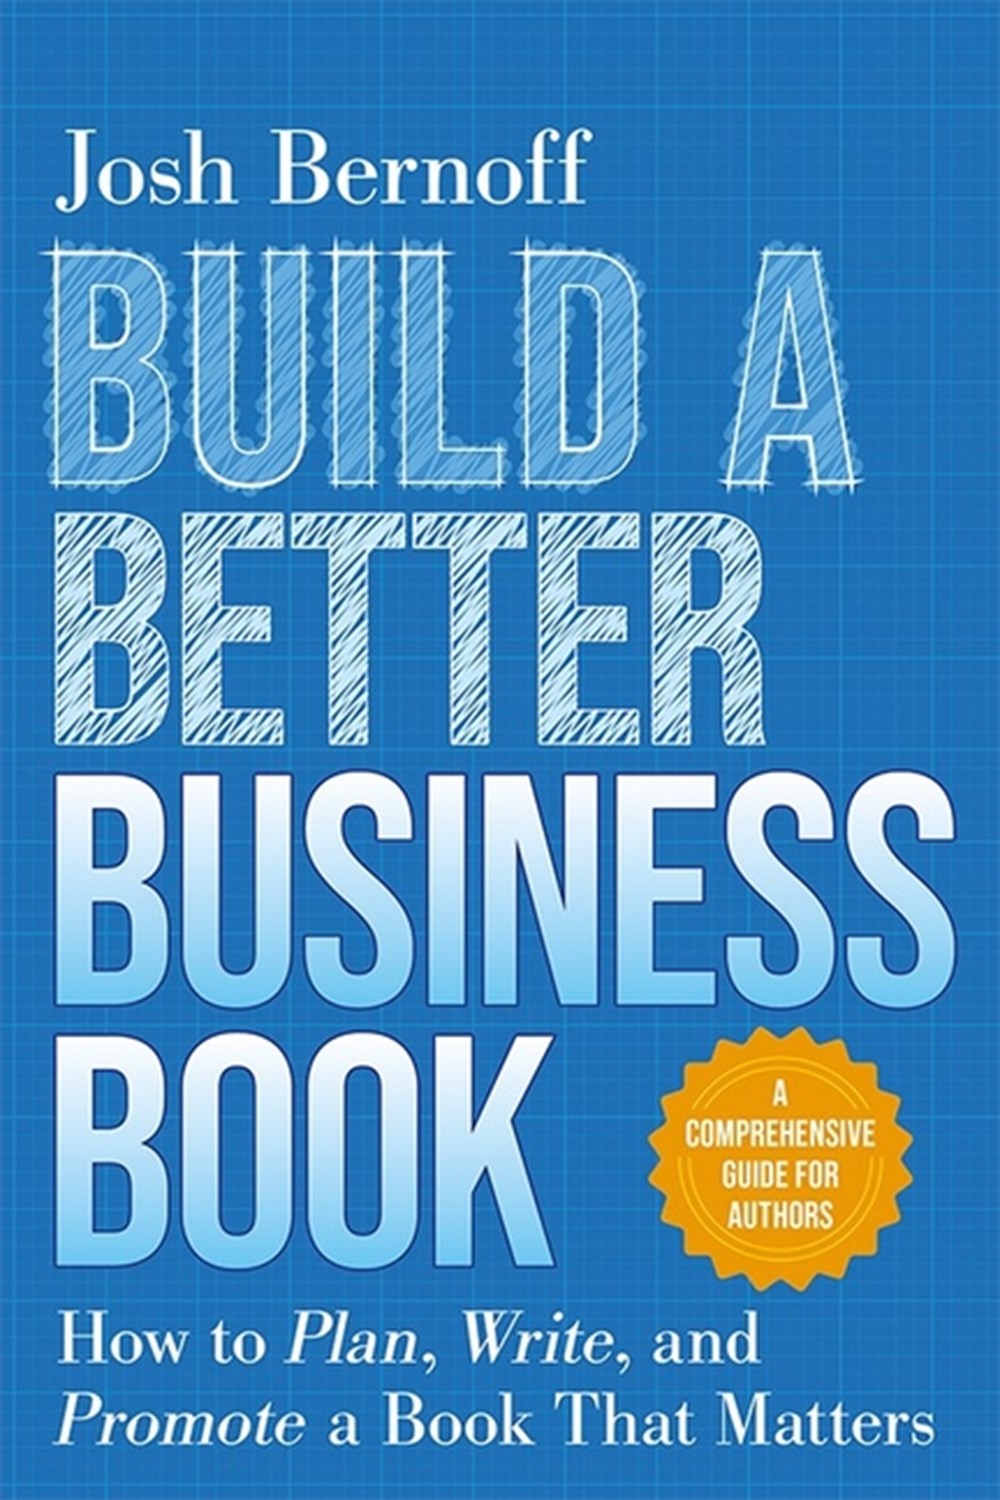 Build a Better Business Book: How to Plan, Write, and Promote a Book That Matters. a Comprehensive G